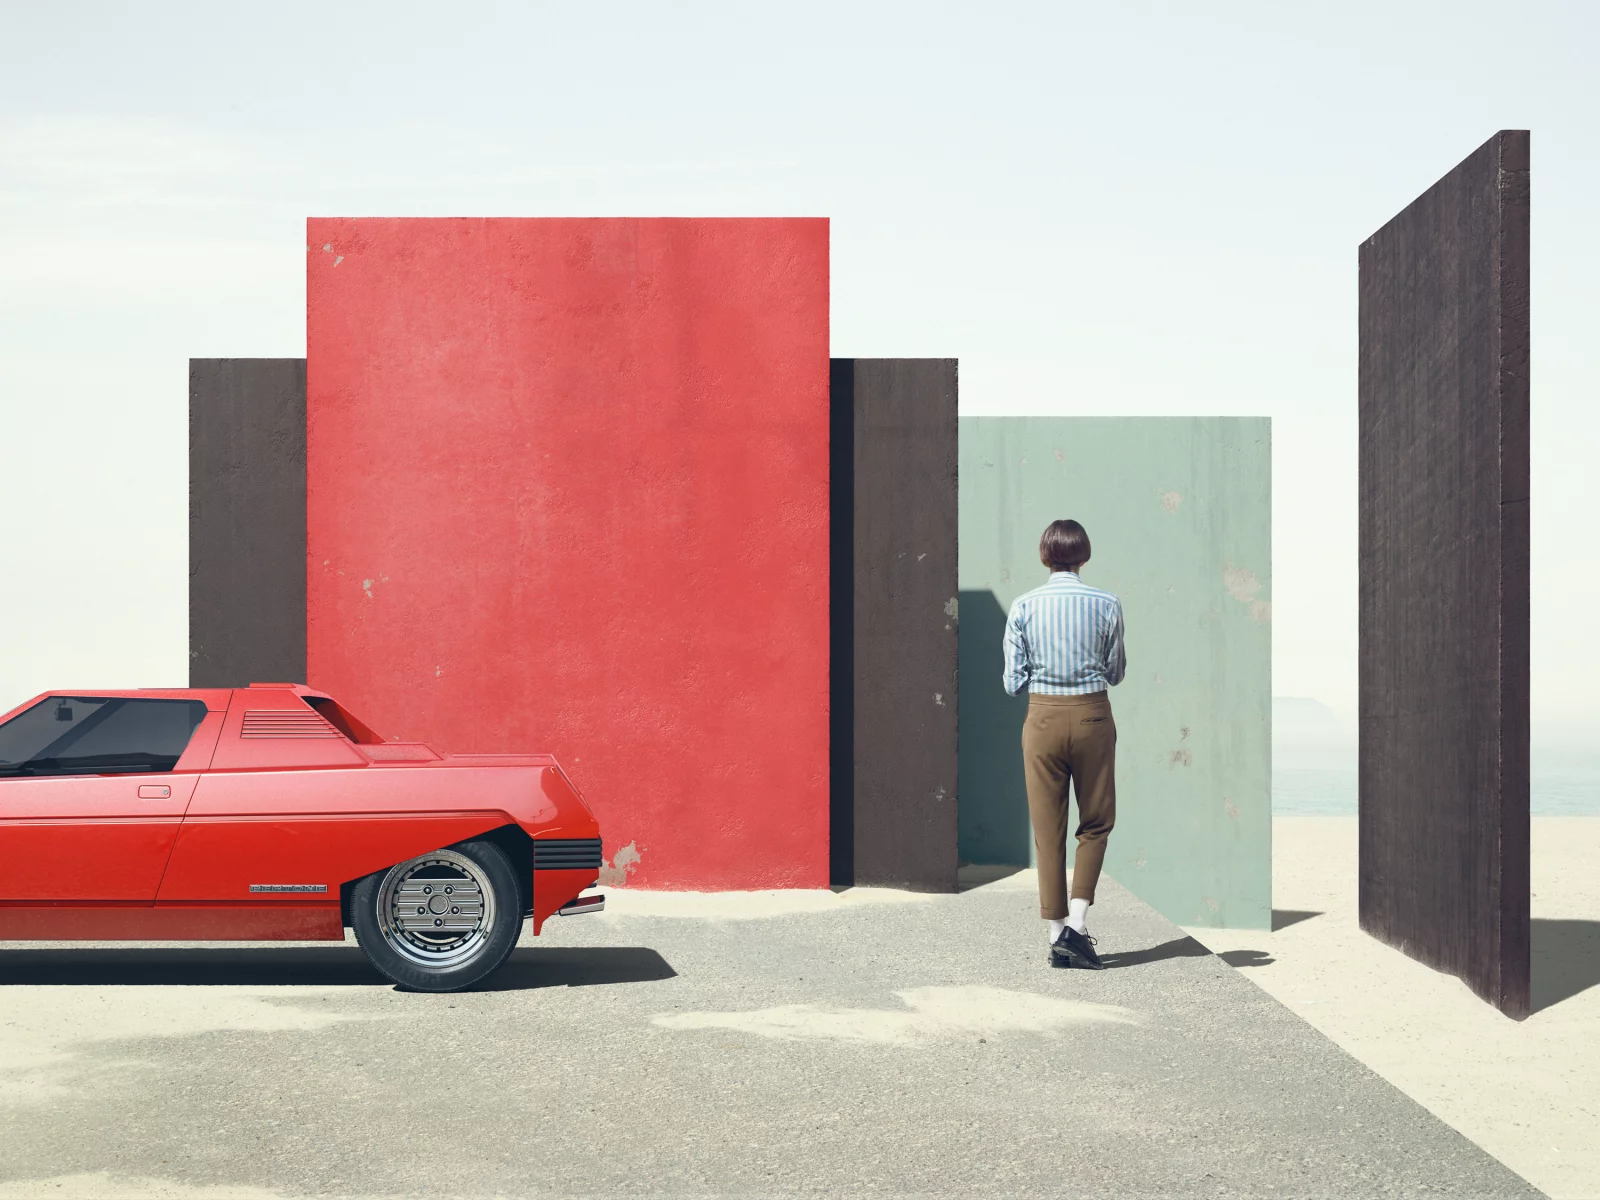 Of Rainbows and other Monuments 2 by Clemens ASCHER